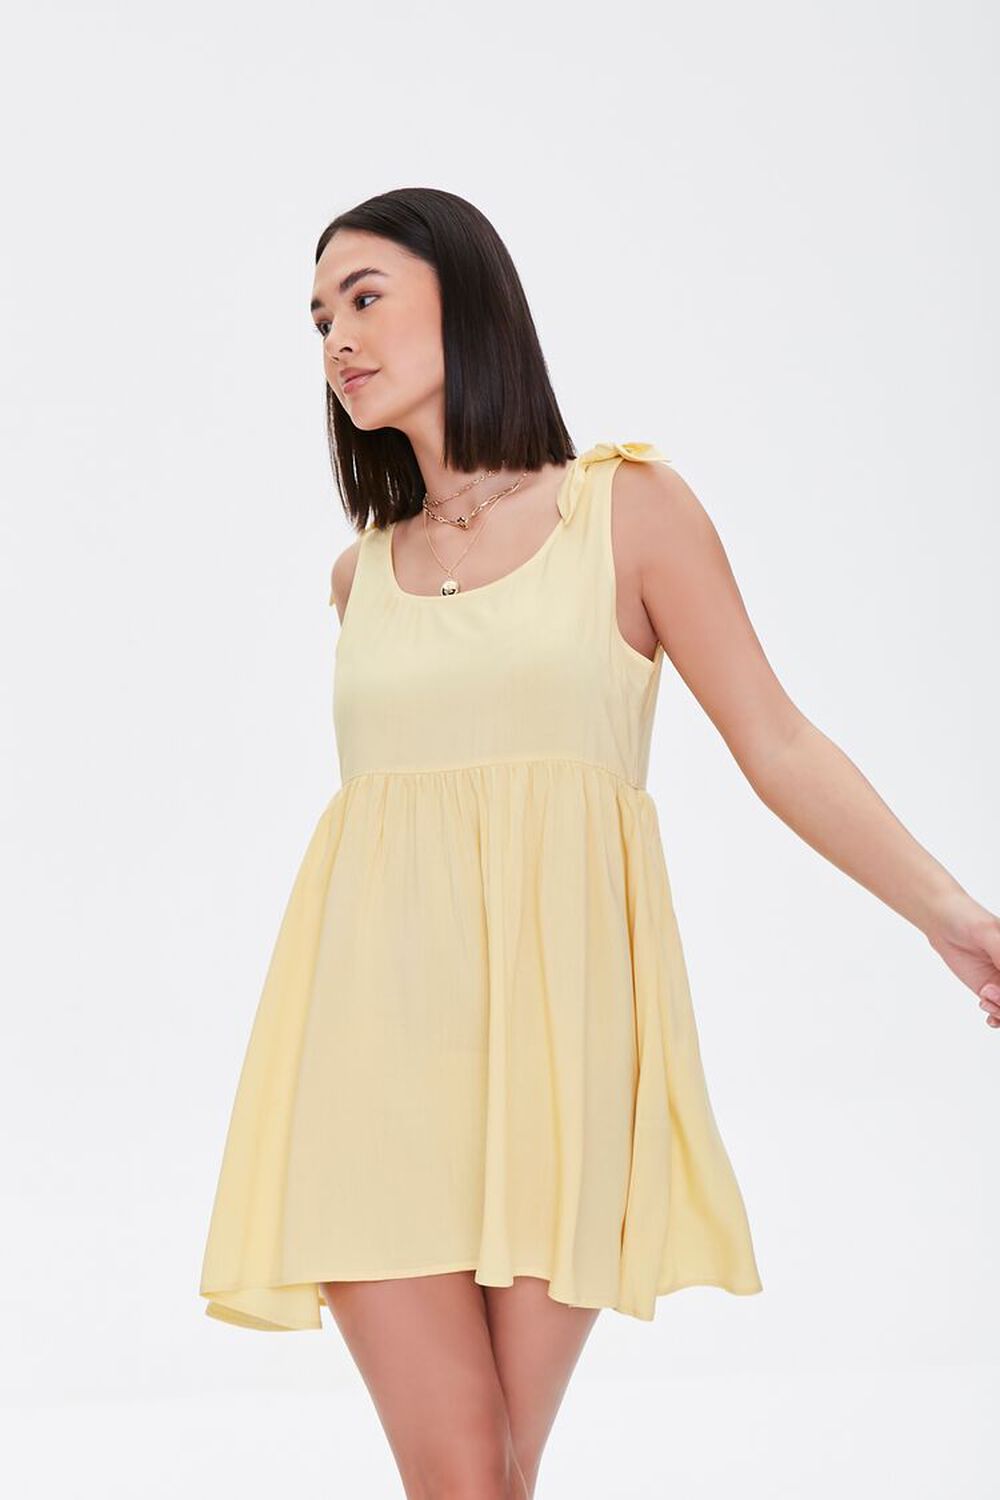 BUTTER Knotted Fit & Flare Dress, image 2